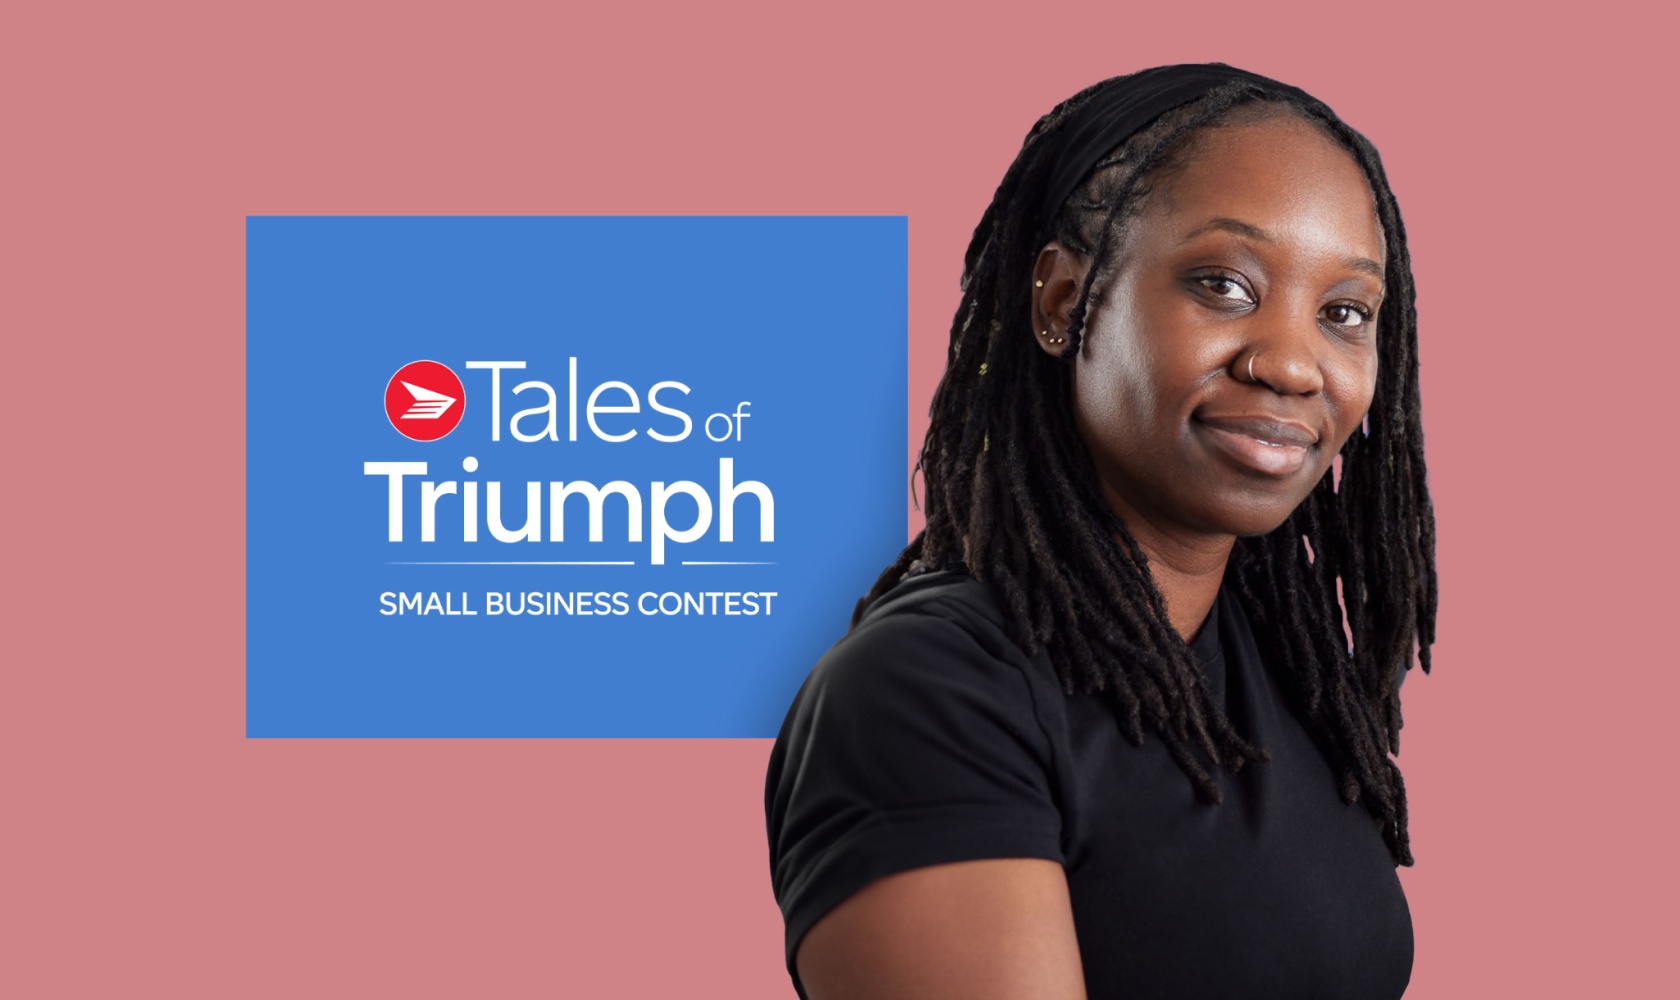 Tales of triumph small business contest. 